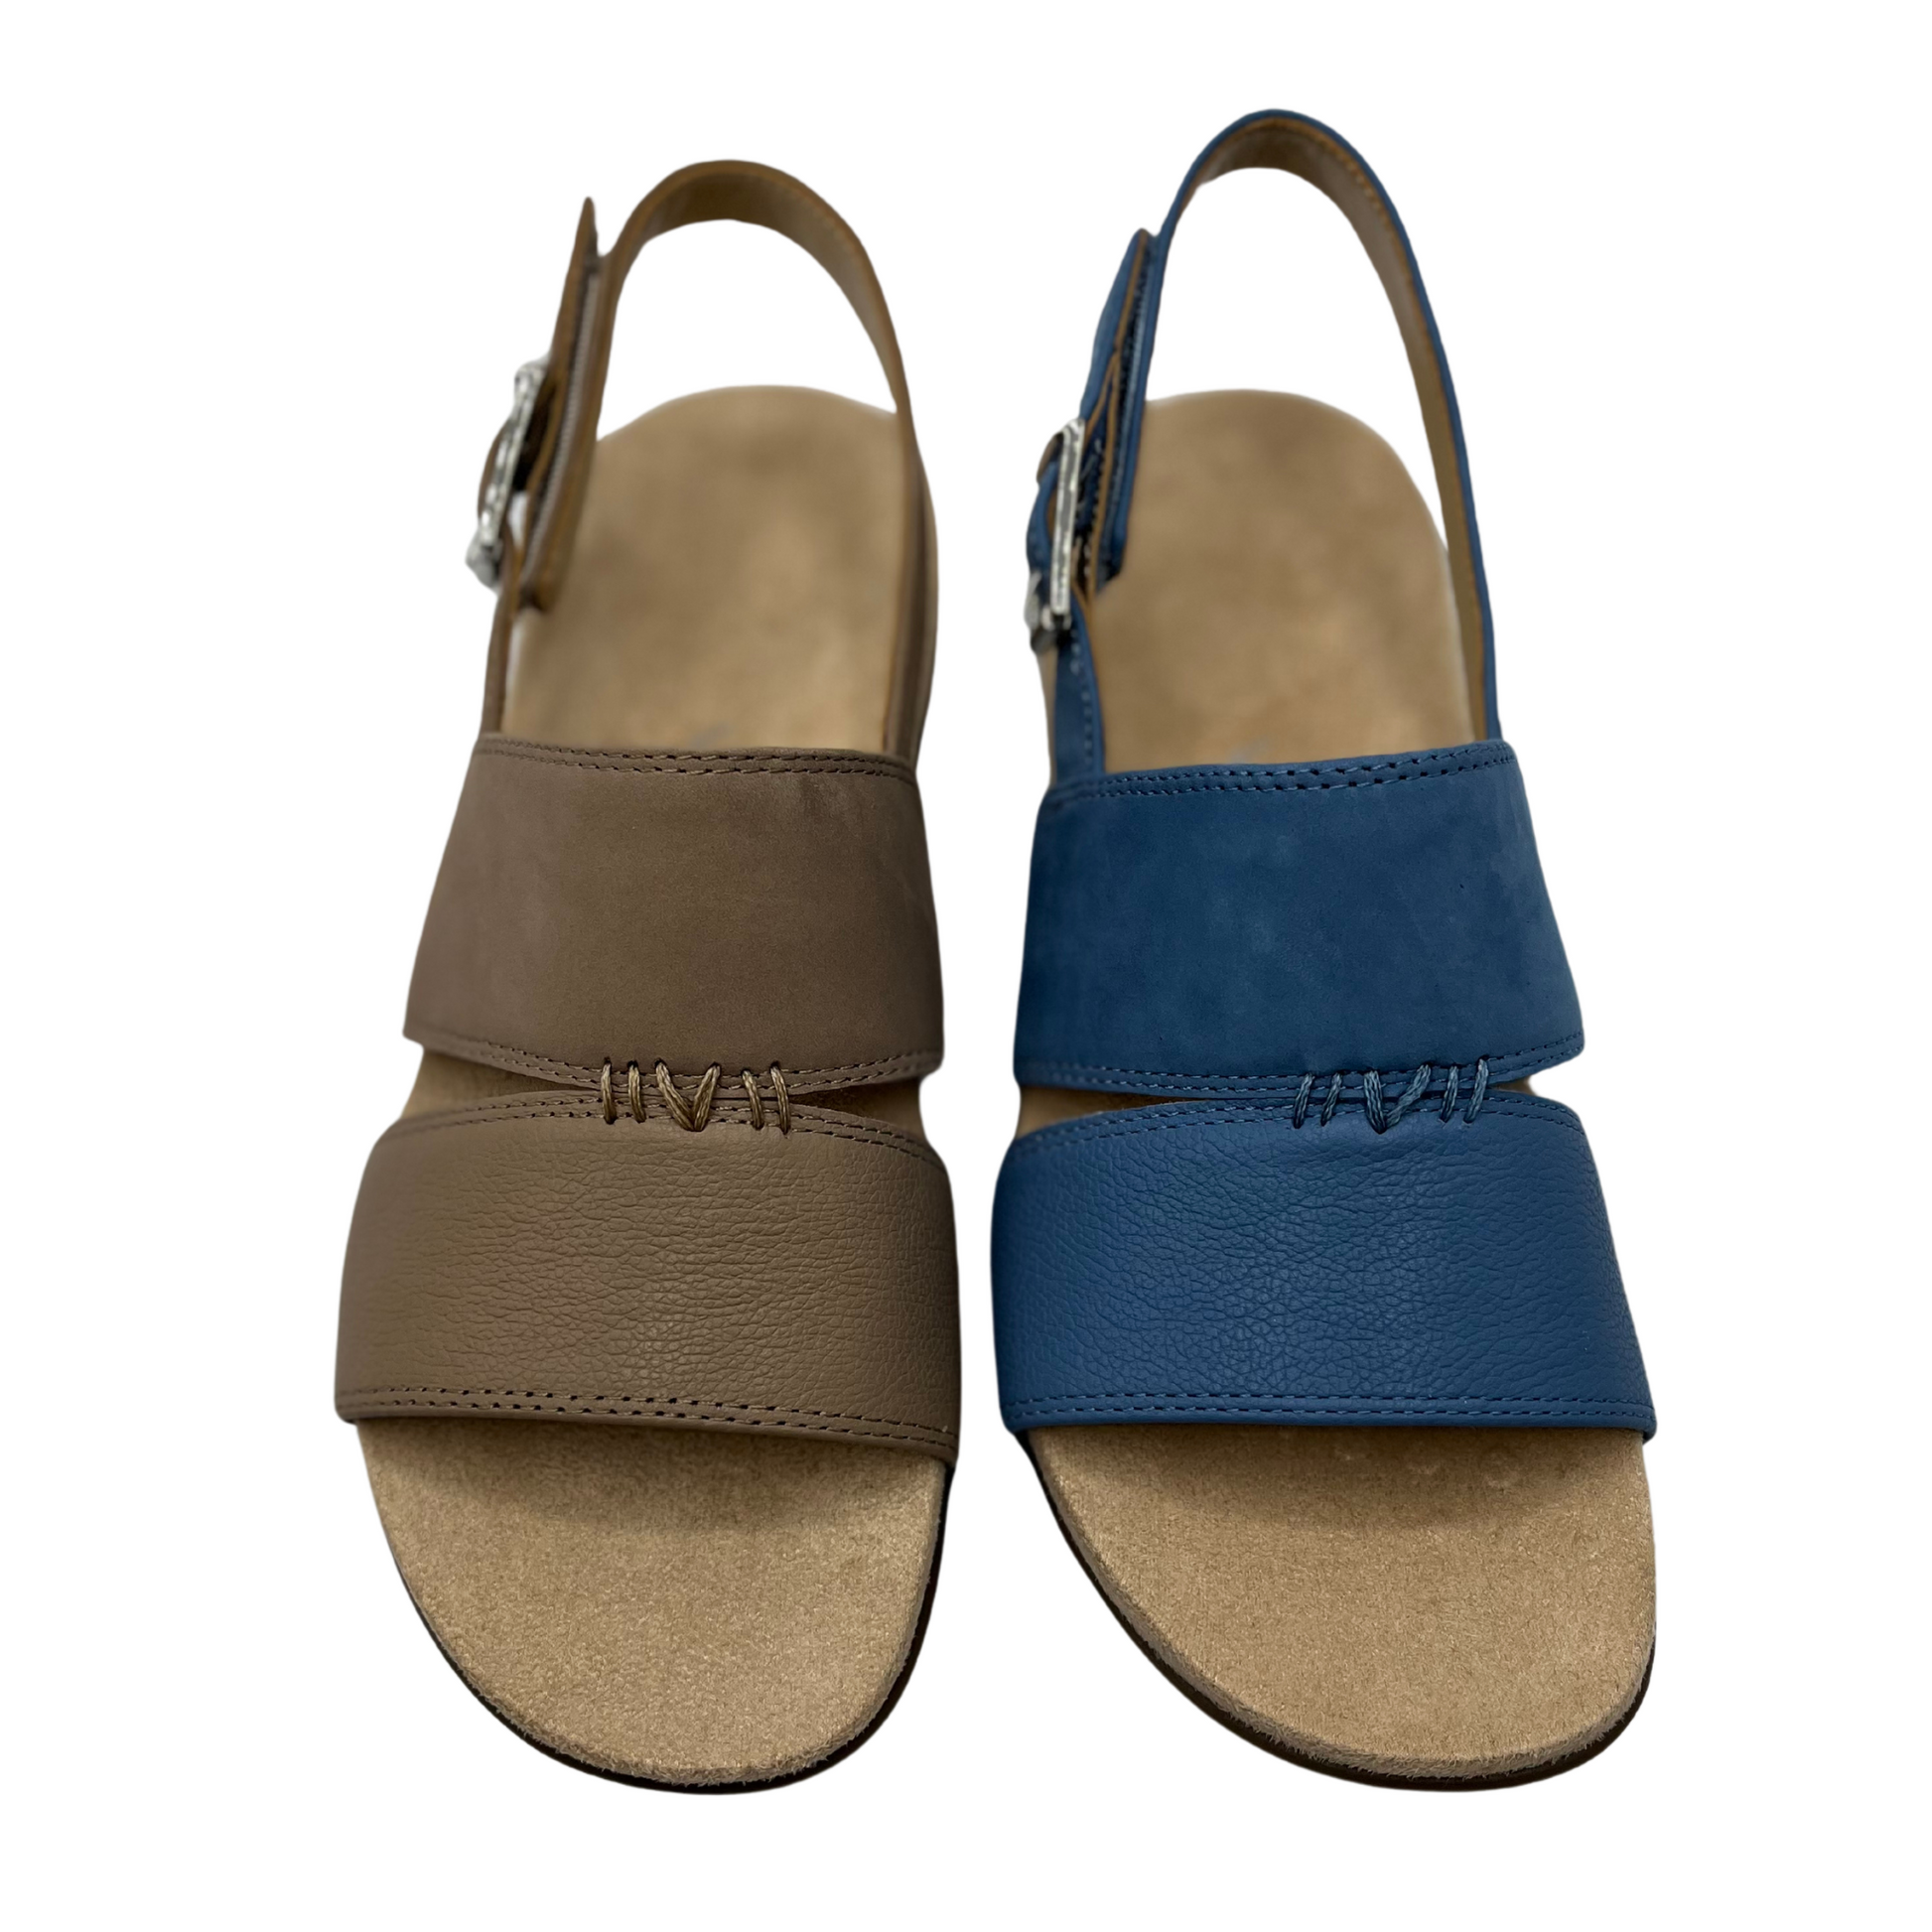 Top down view of one brown leather sandal beside one blue leather sandal. Both have a slingback strap with silver buckle